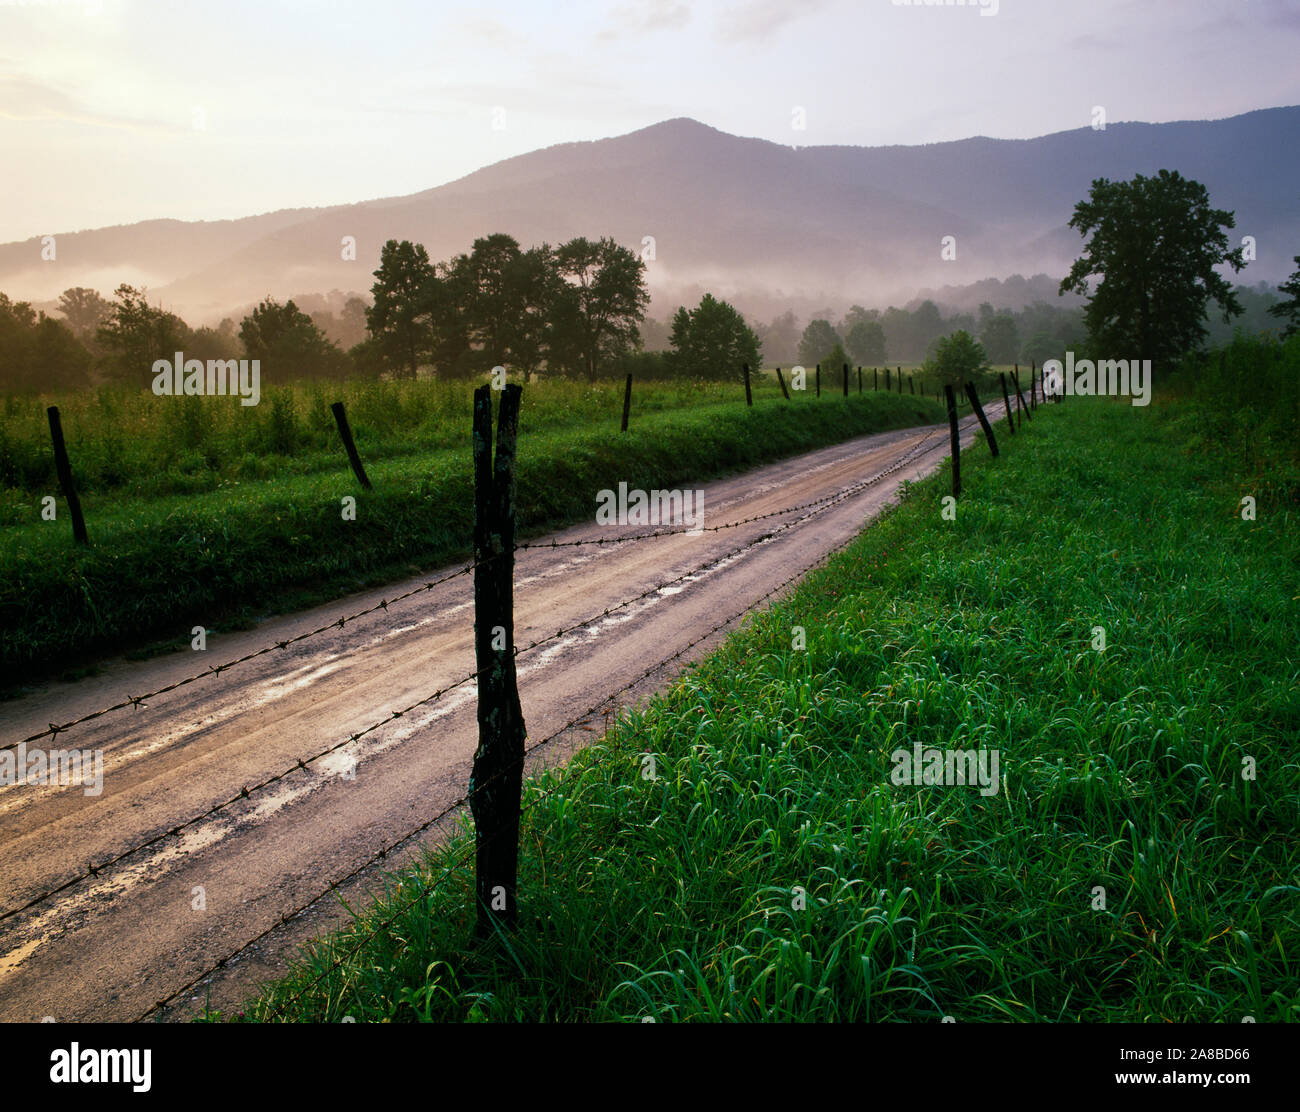 Road and barbed-wire fence in countryside with mountains in background Stock Photo